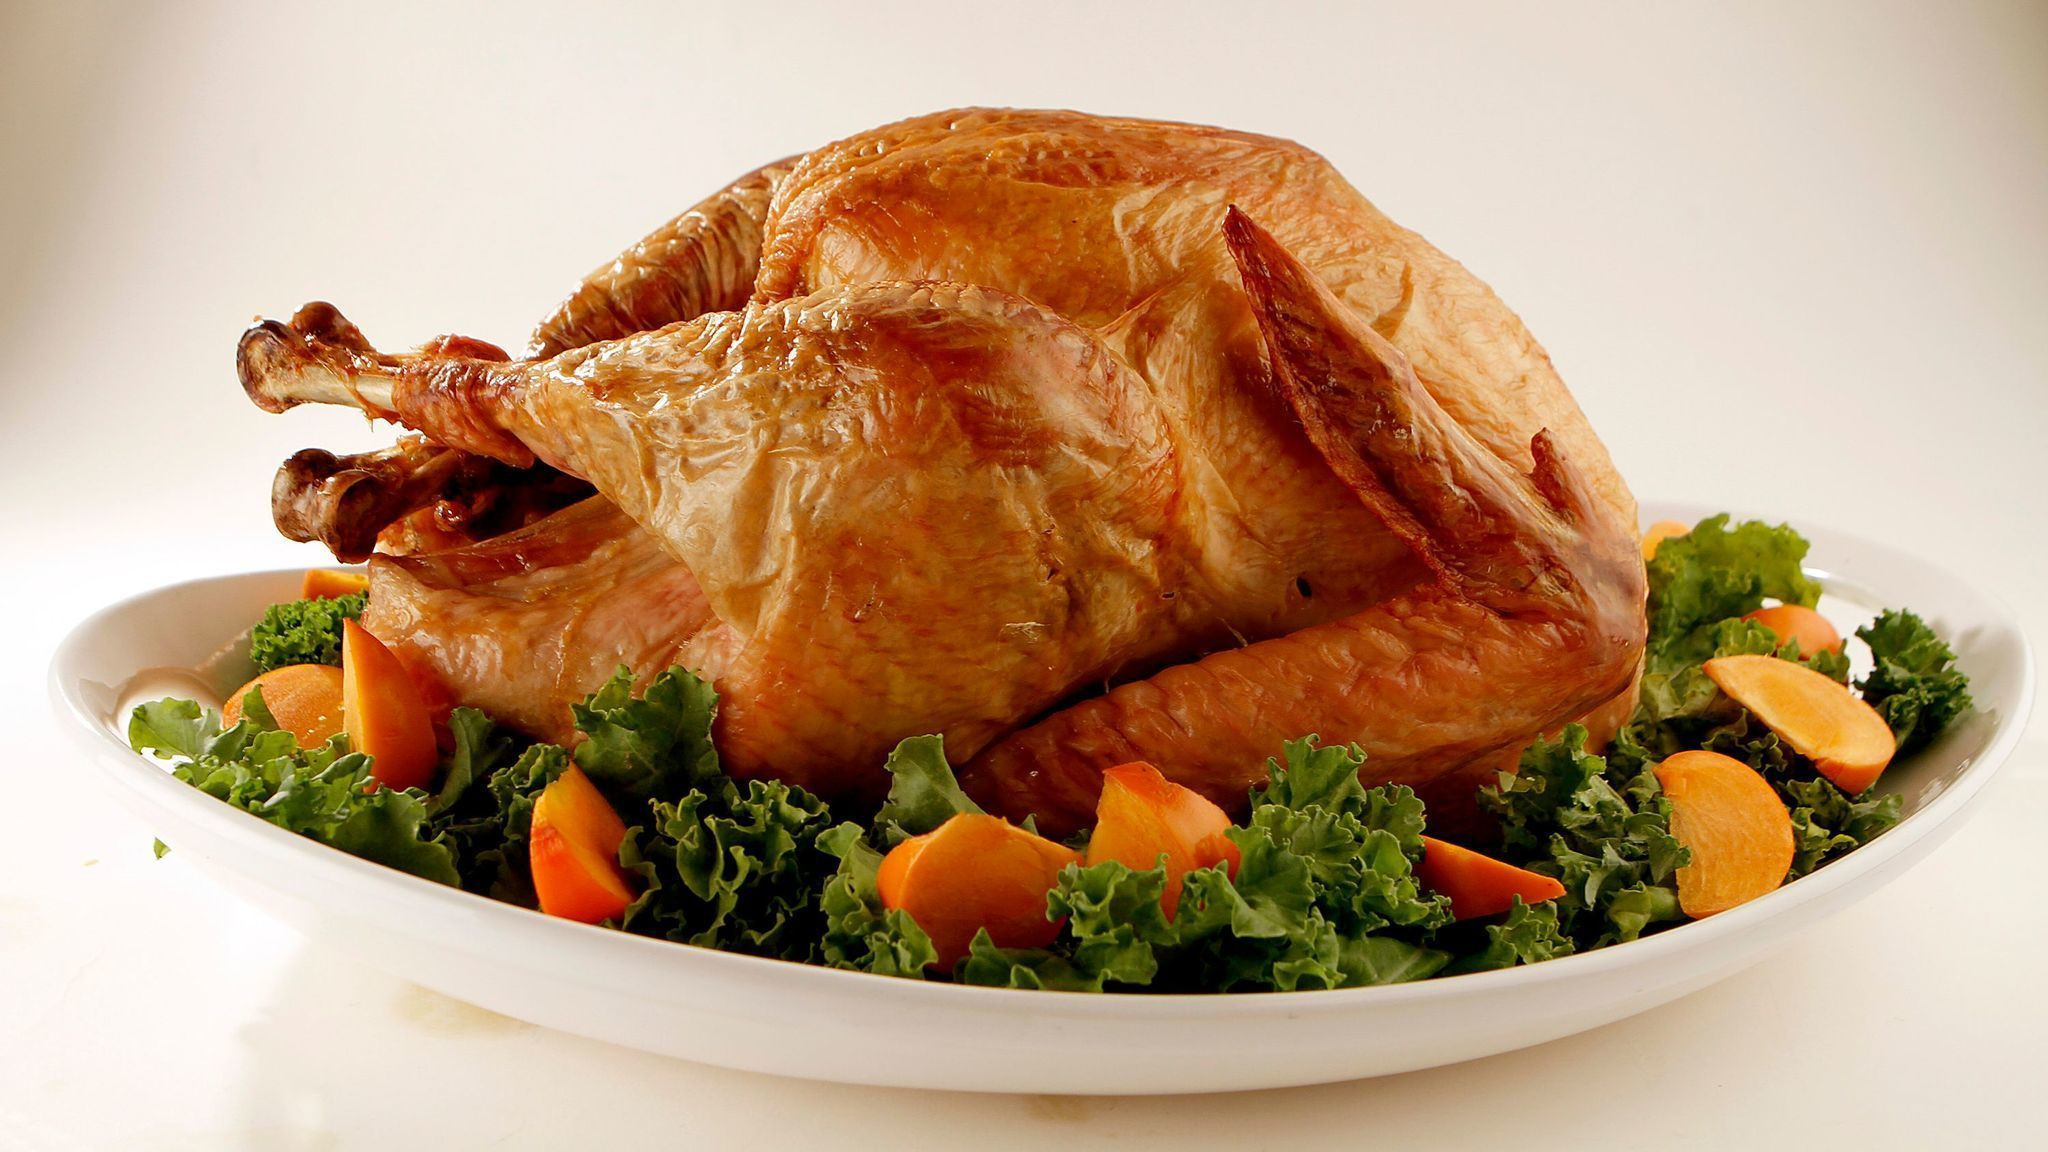 Thanksgiving Turkey Image
 A beginner s guide to cooking a Thanksgiving turkey LA Times